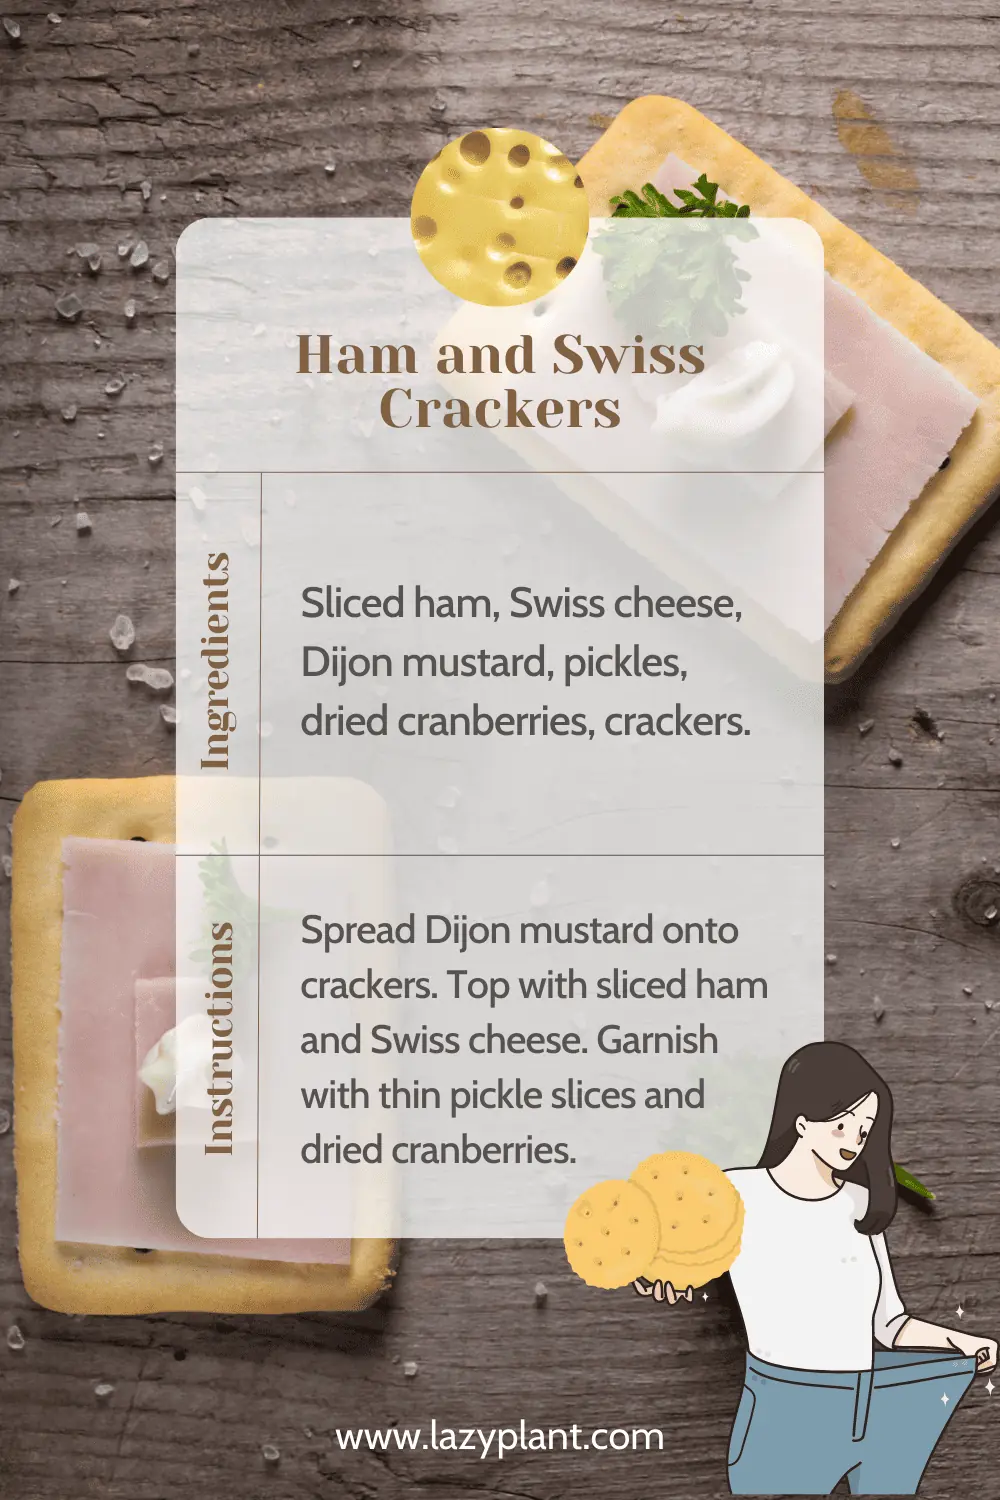 Easy & quick protein-rich recipe ideas with cheese & crackers to eat at dinner for weight loss.